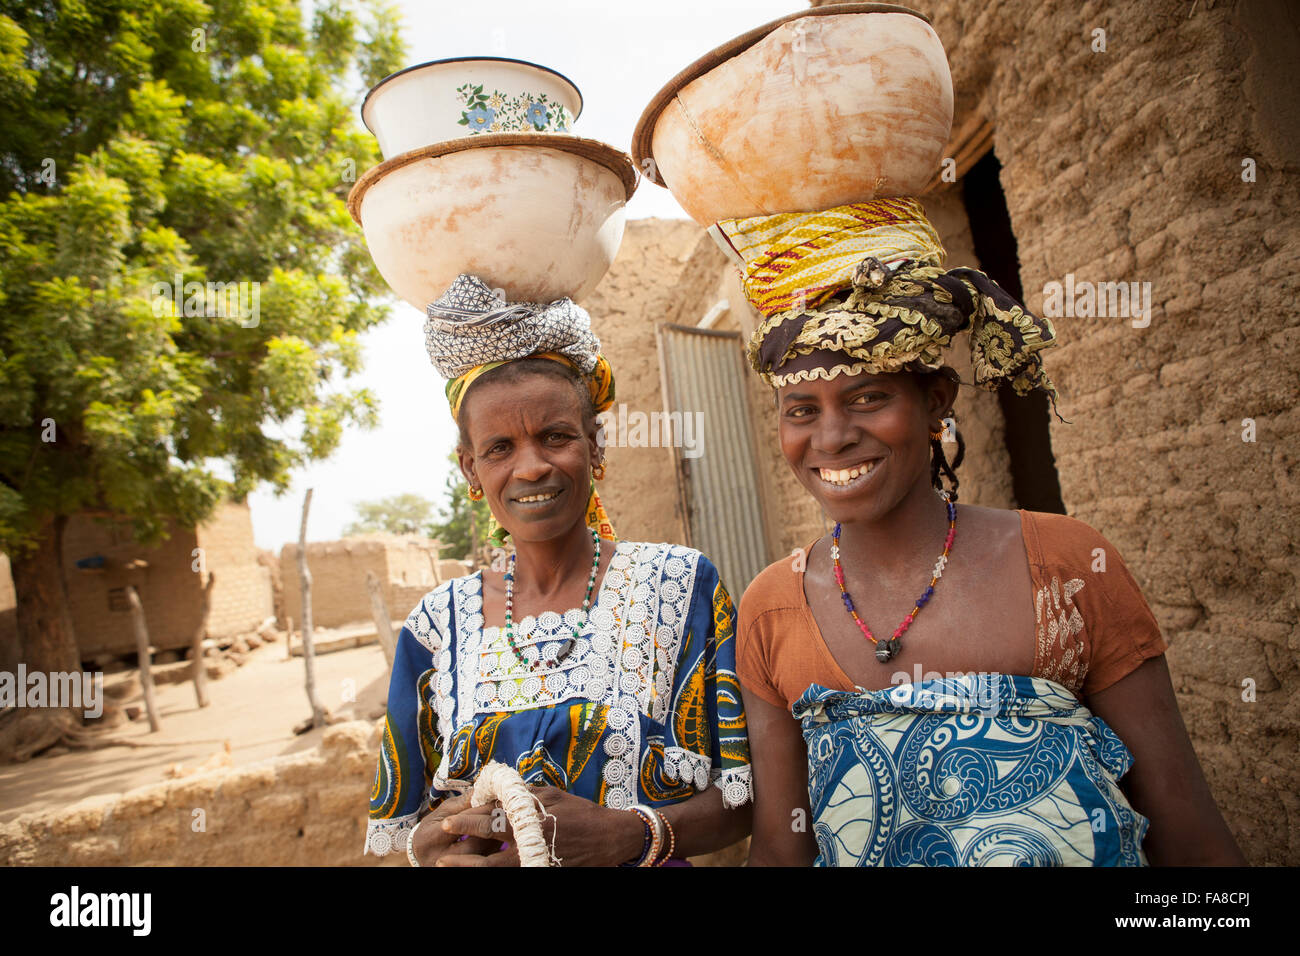 Women carry bowls on their head in Sourou Province, Burkina Faso. Stock Photo